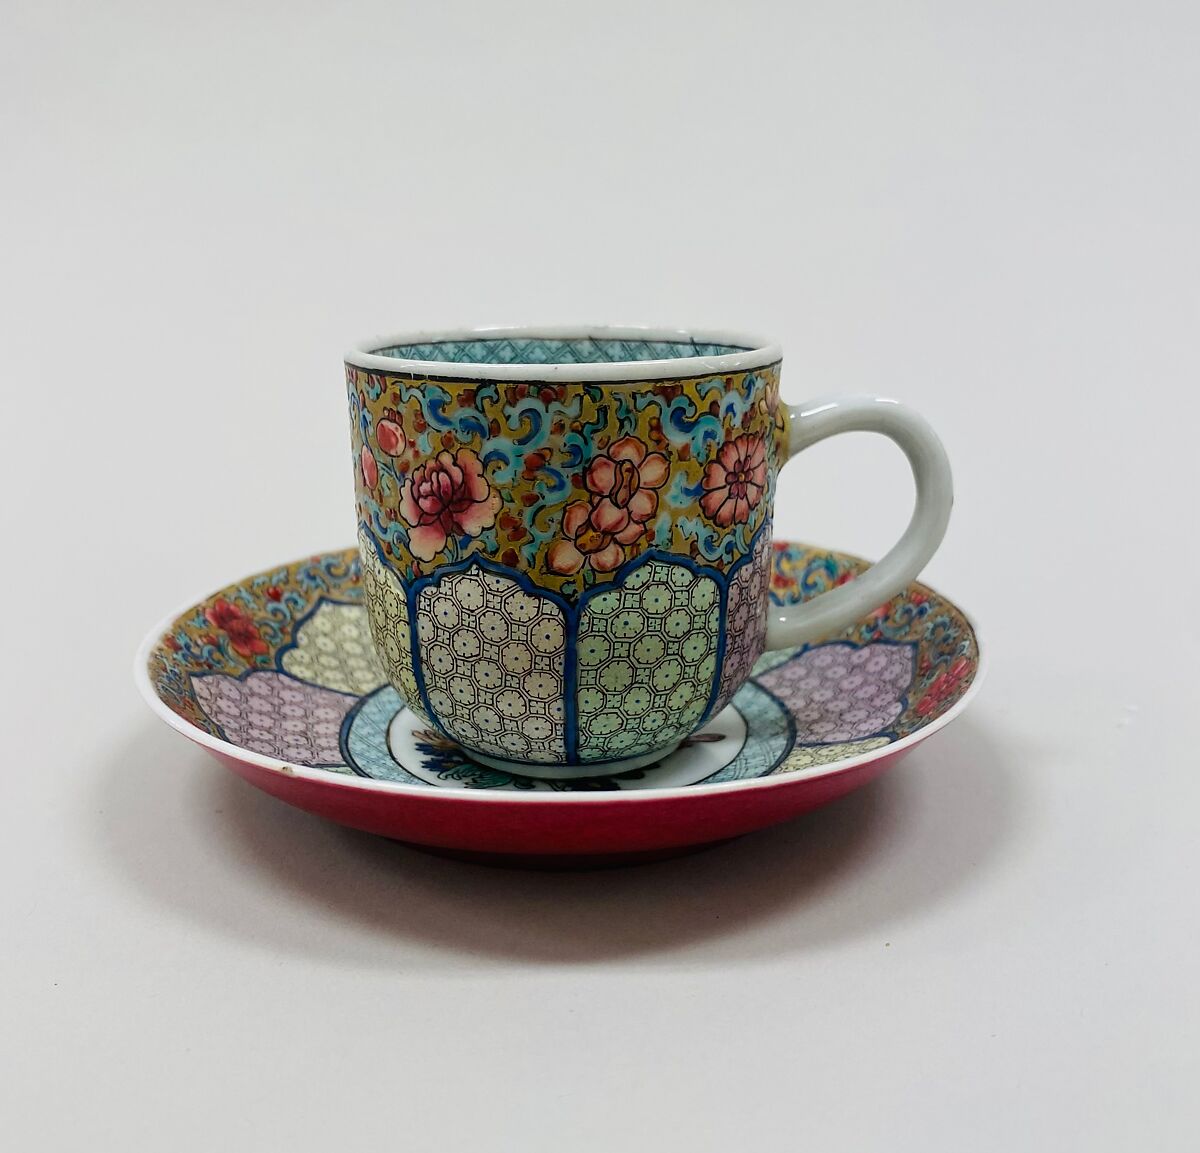 Cup and saucer with floral patterns, Porcelain painted in overglaze polychrome enamels (Jingdezhen ware), China 